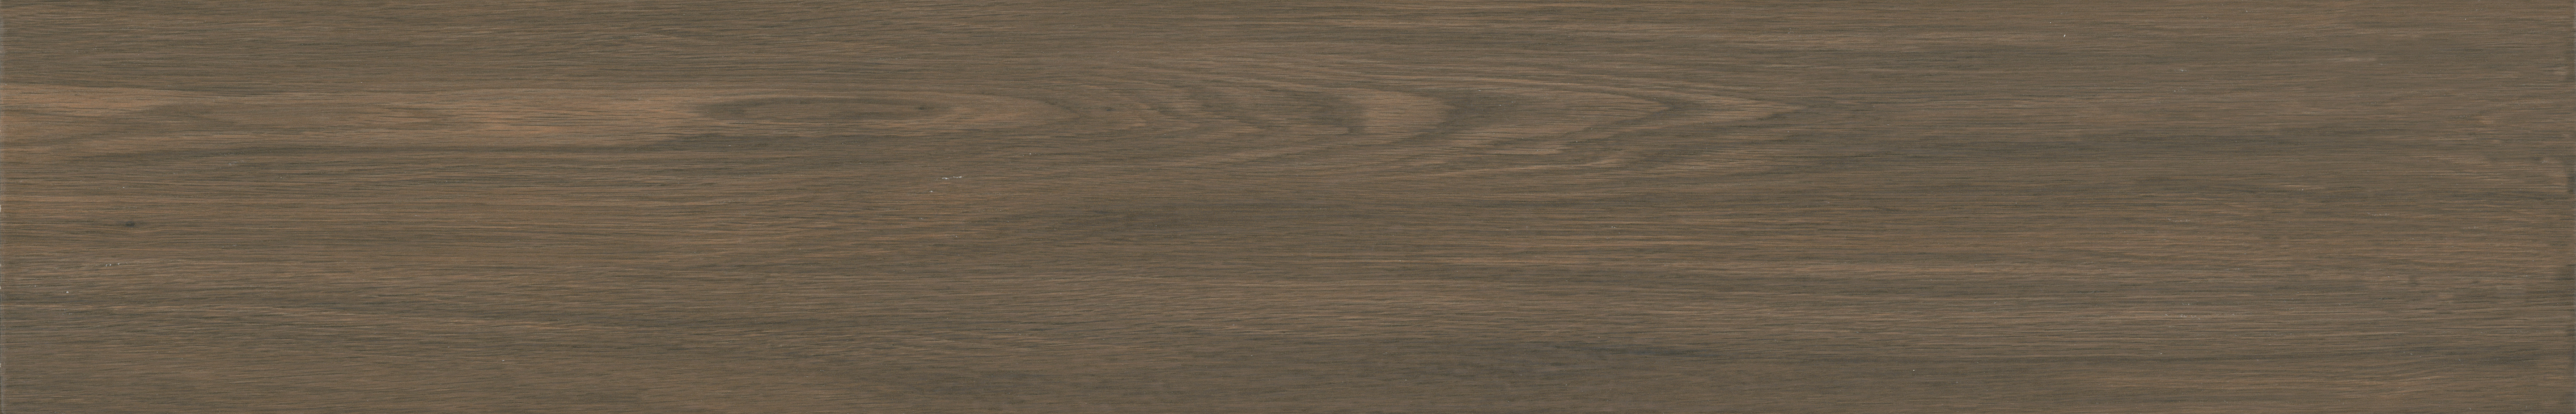 cinnamon pattern glazed porcelain field tile from vintagewood anatolia collection distributed by surface group international matte finish pressed edge 6x36 rectangle shape